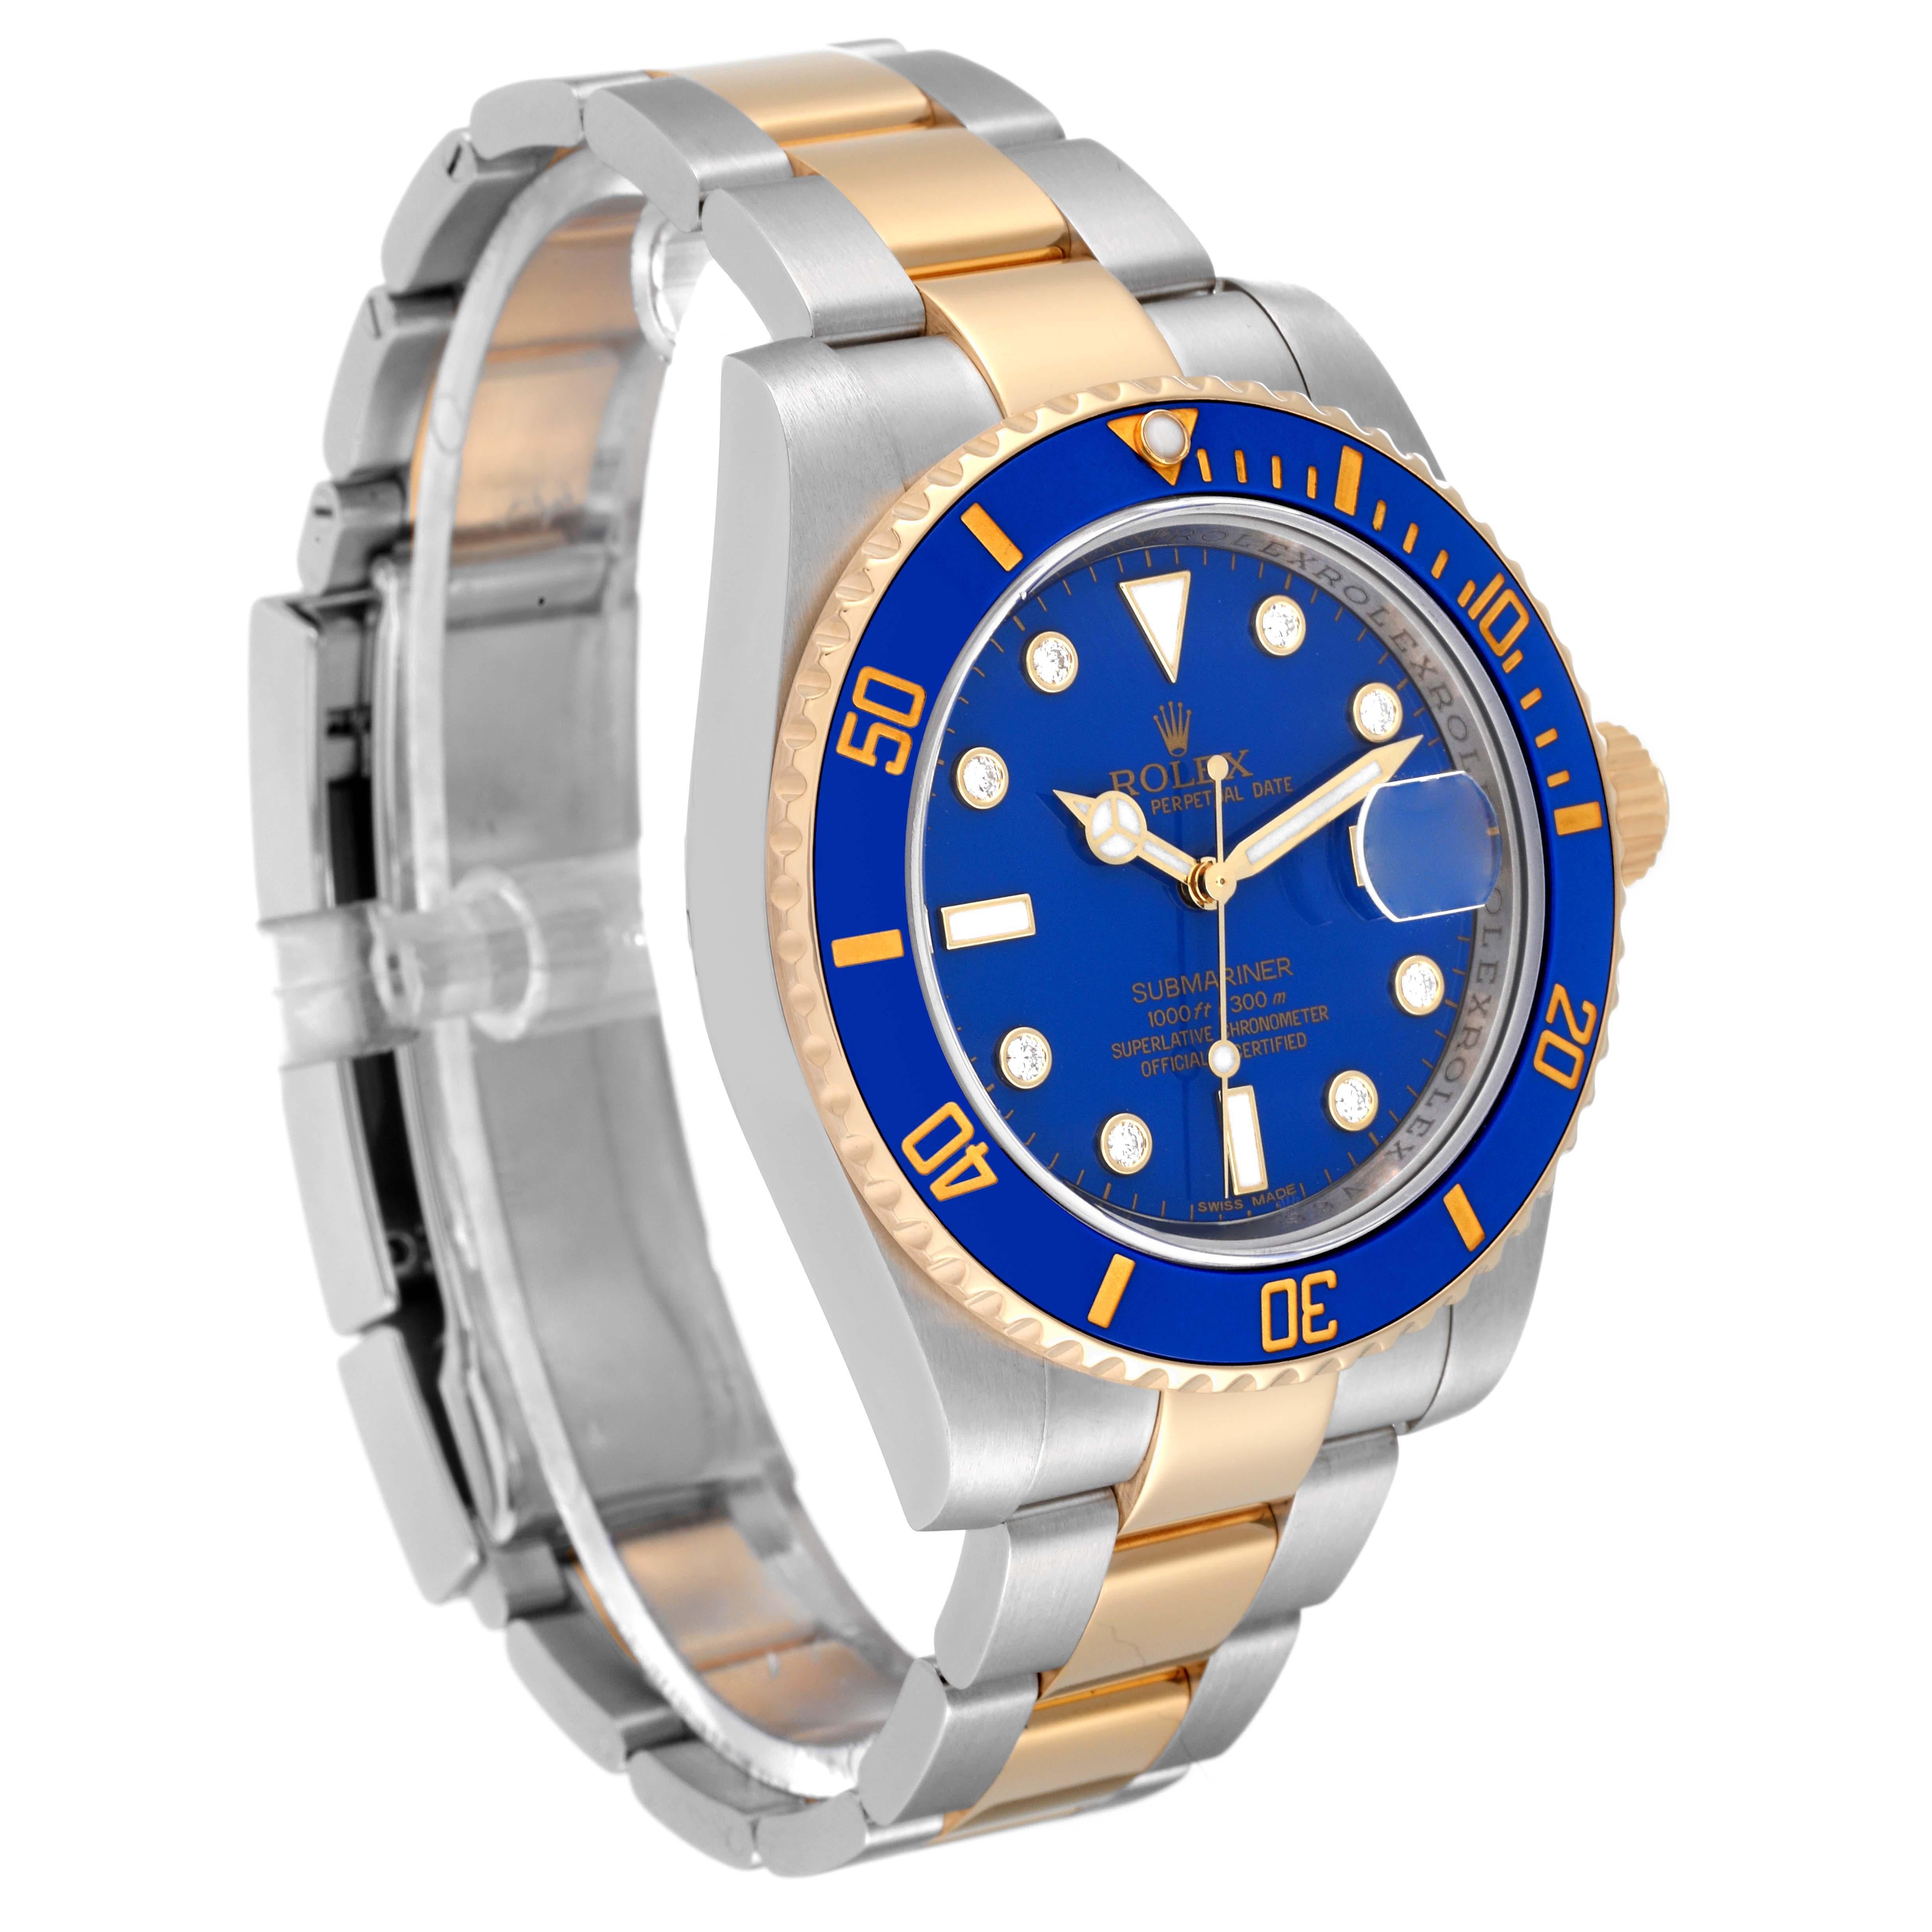 Rolex Submariner Steel Yellow Gold Blue Diamond Dial Mens Watch 116613 In Excellent Condition For Sale In Atlanta, GA